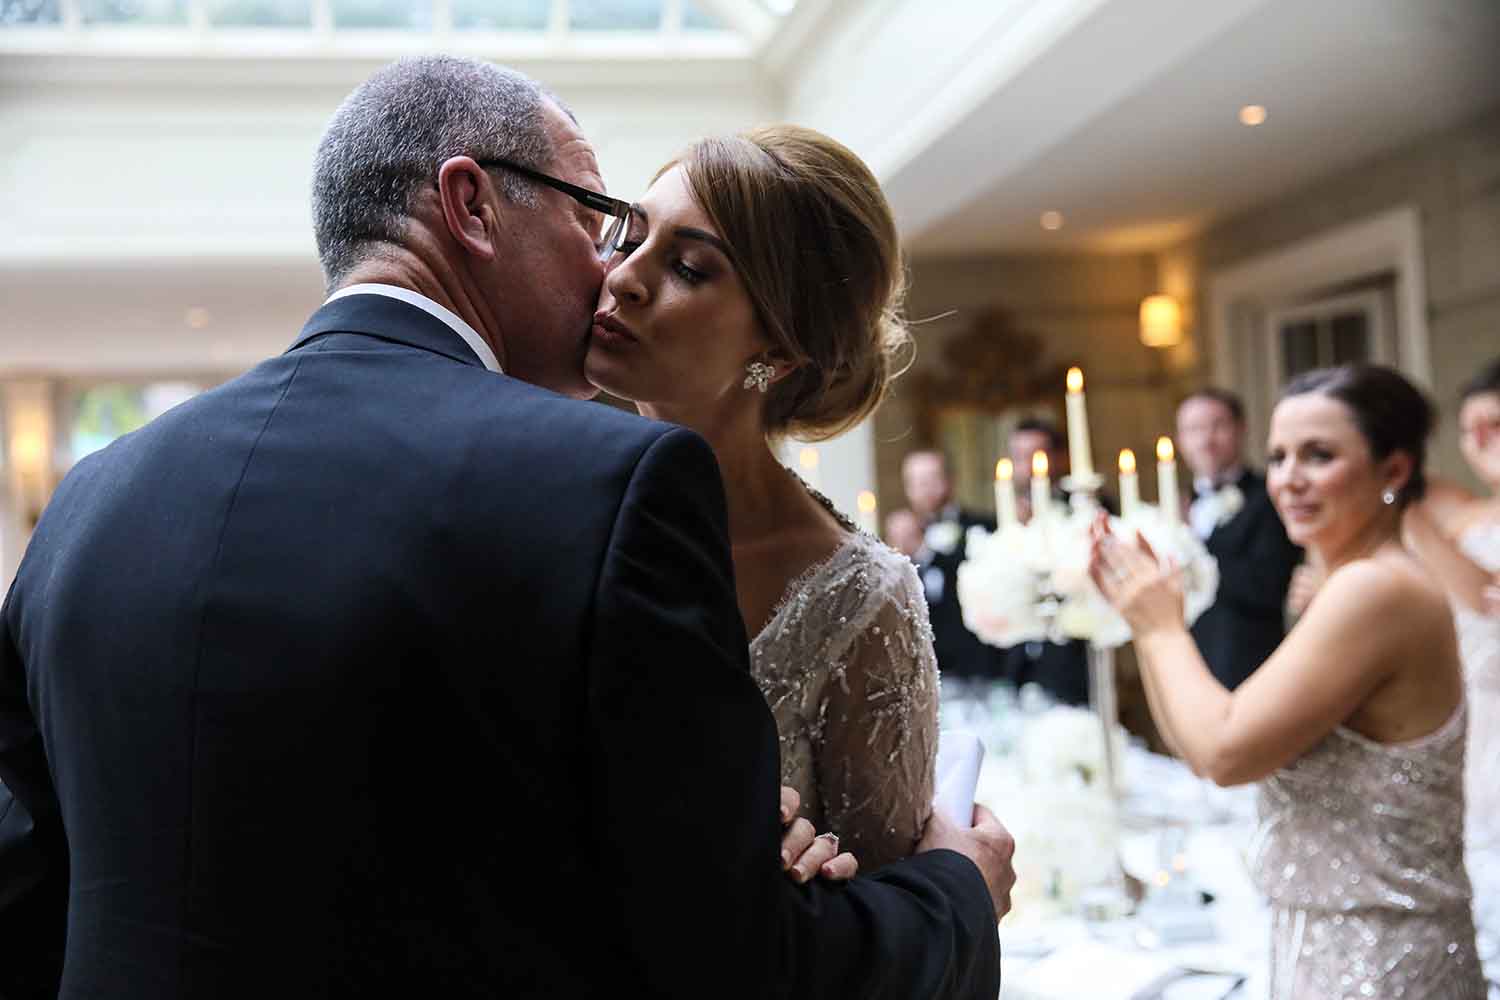 Father and daughter kissing on her wedding day